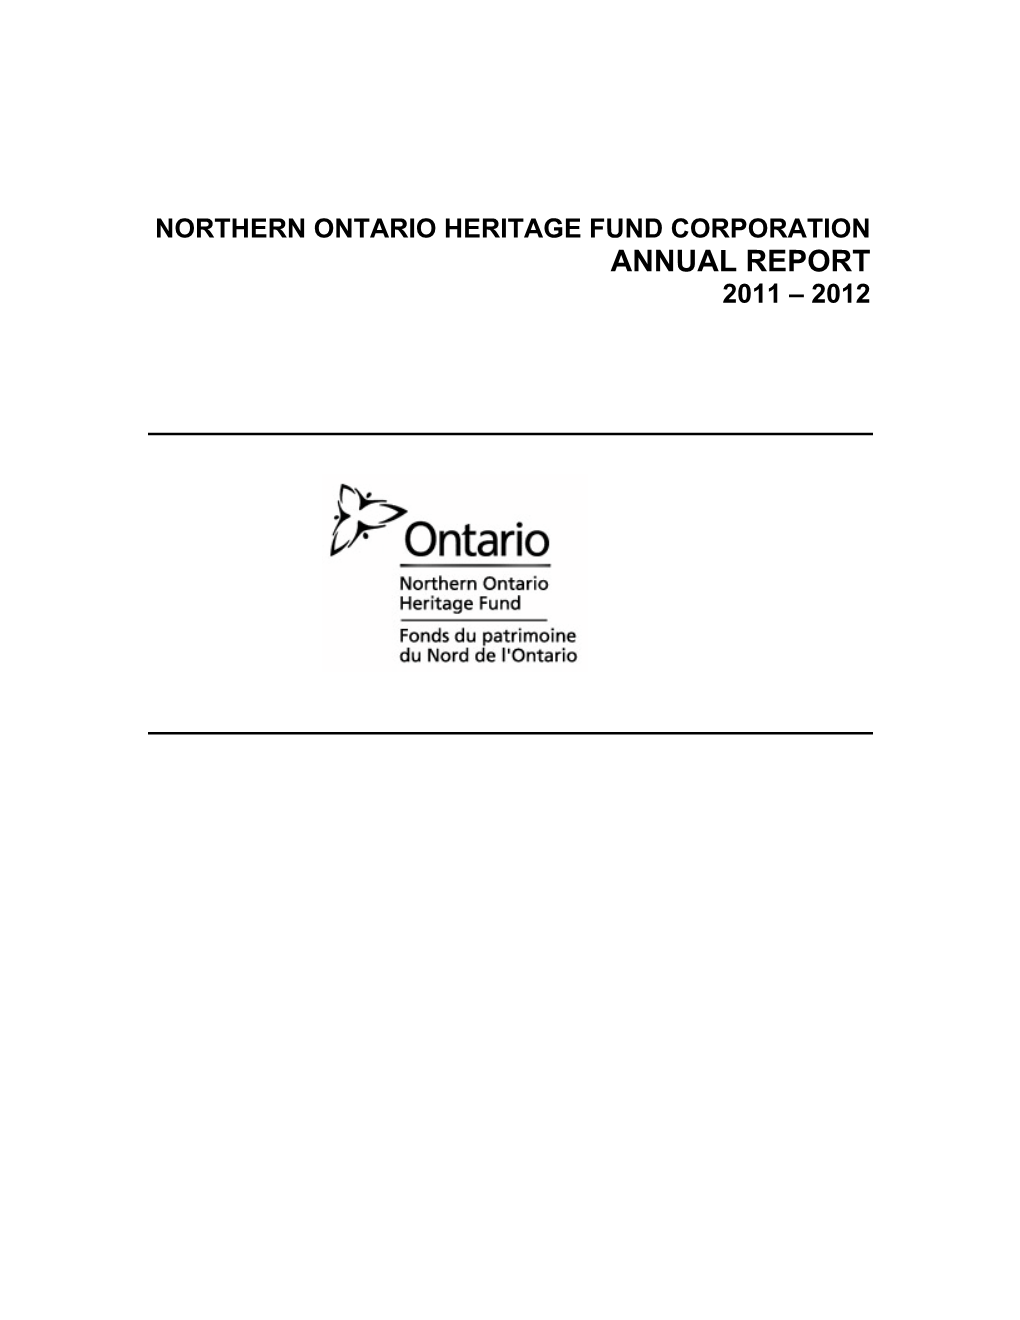 Northern Ontario Heritage Fund Corporation Annual Report 2011 – 2012